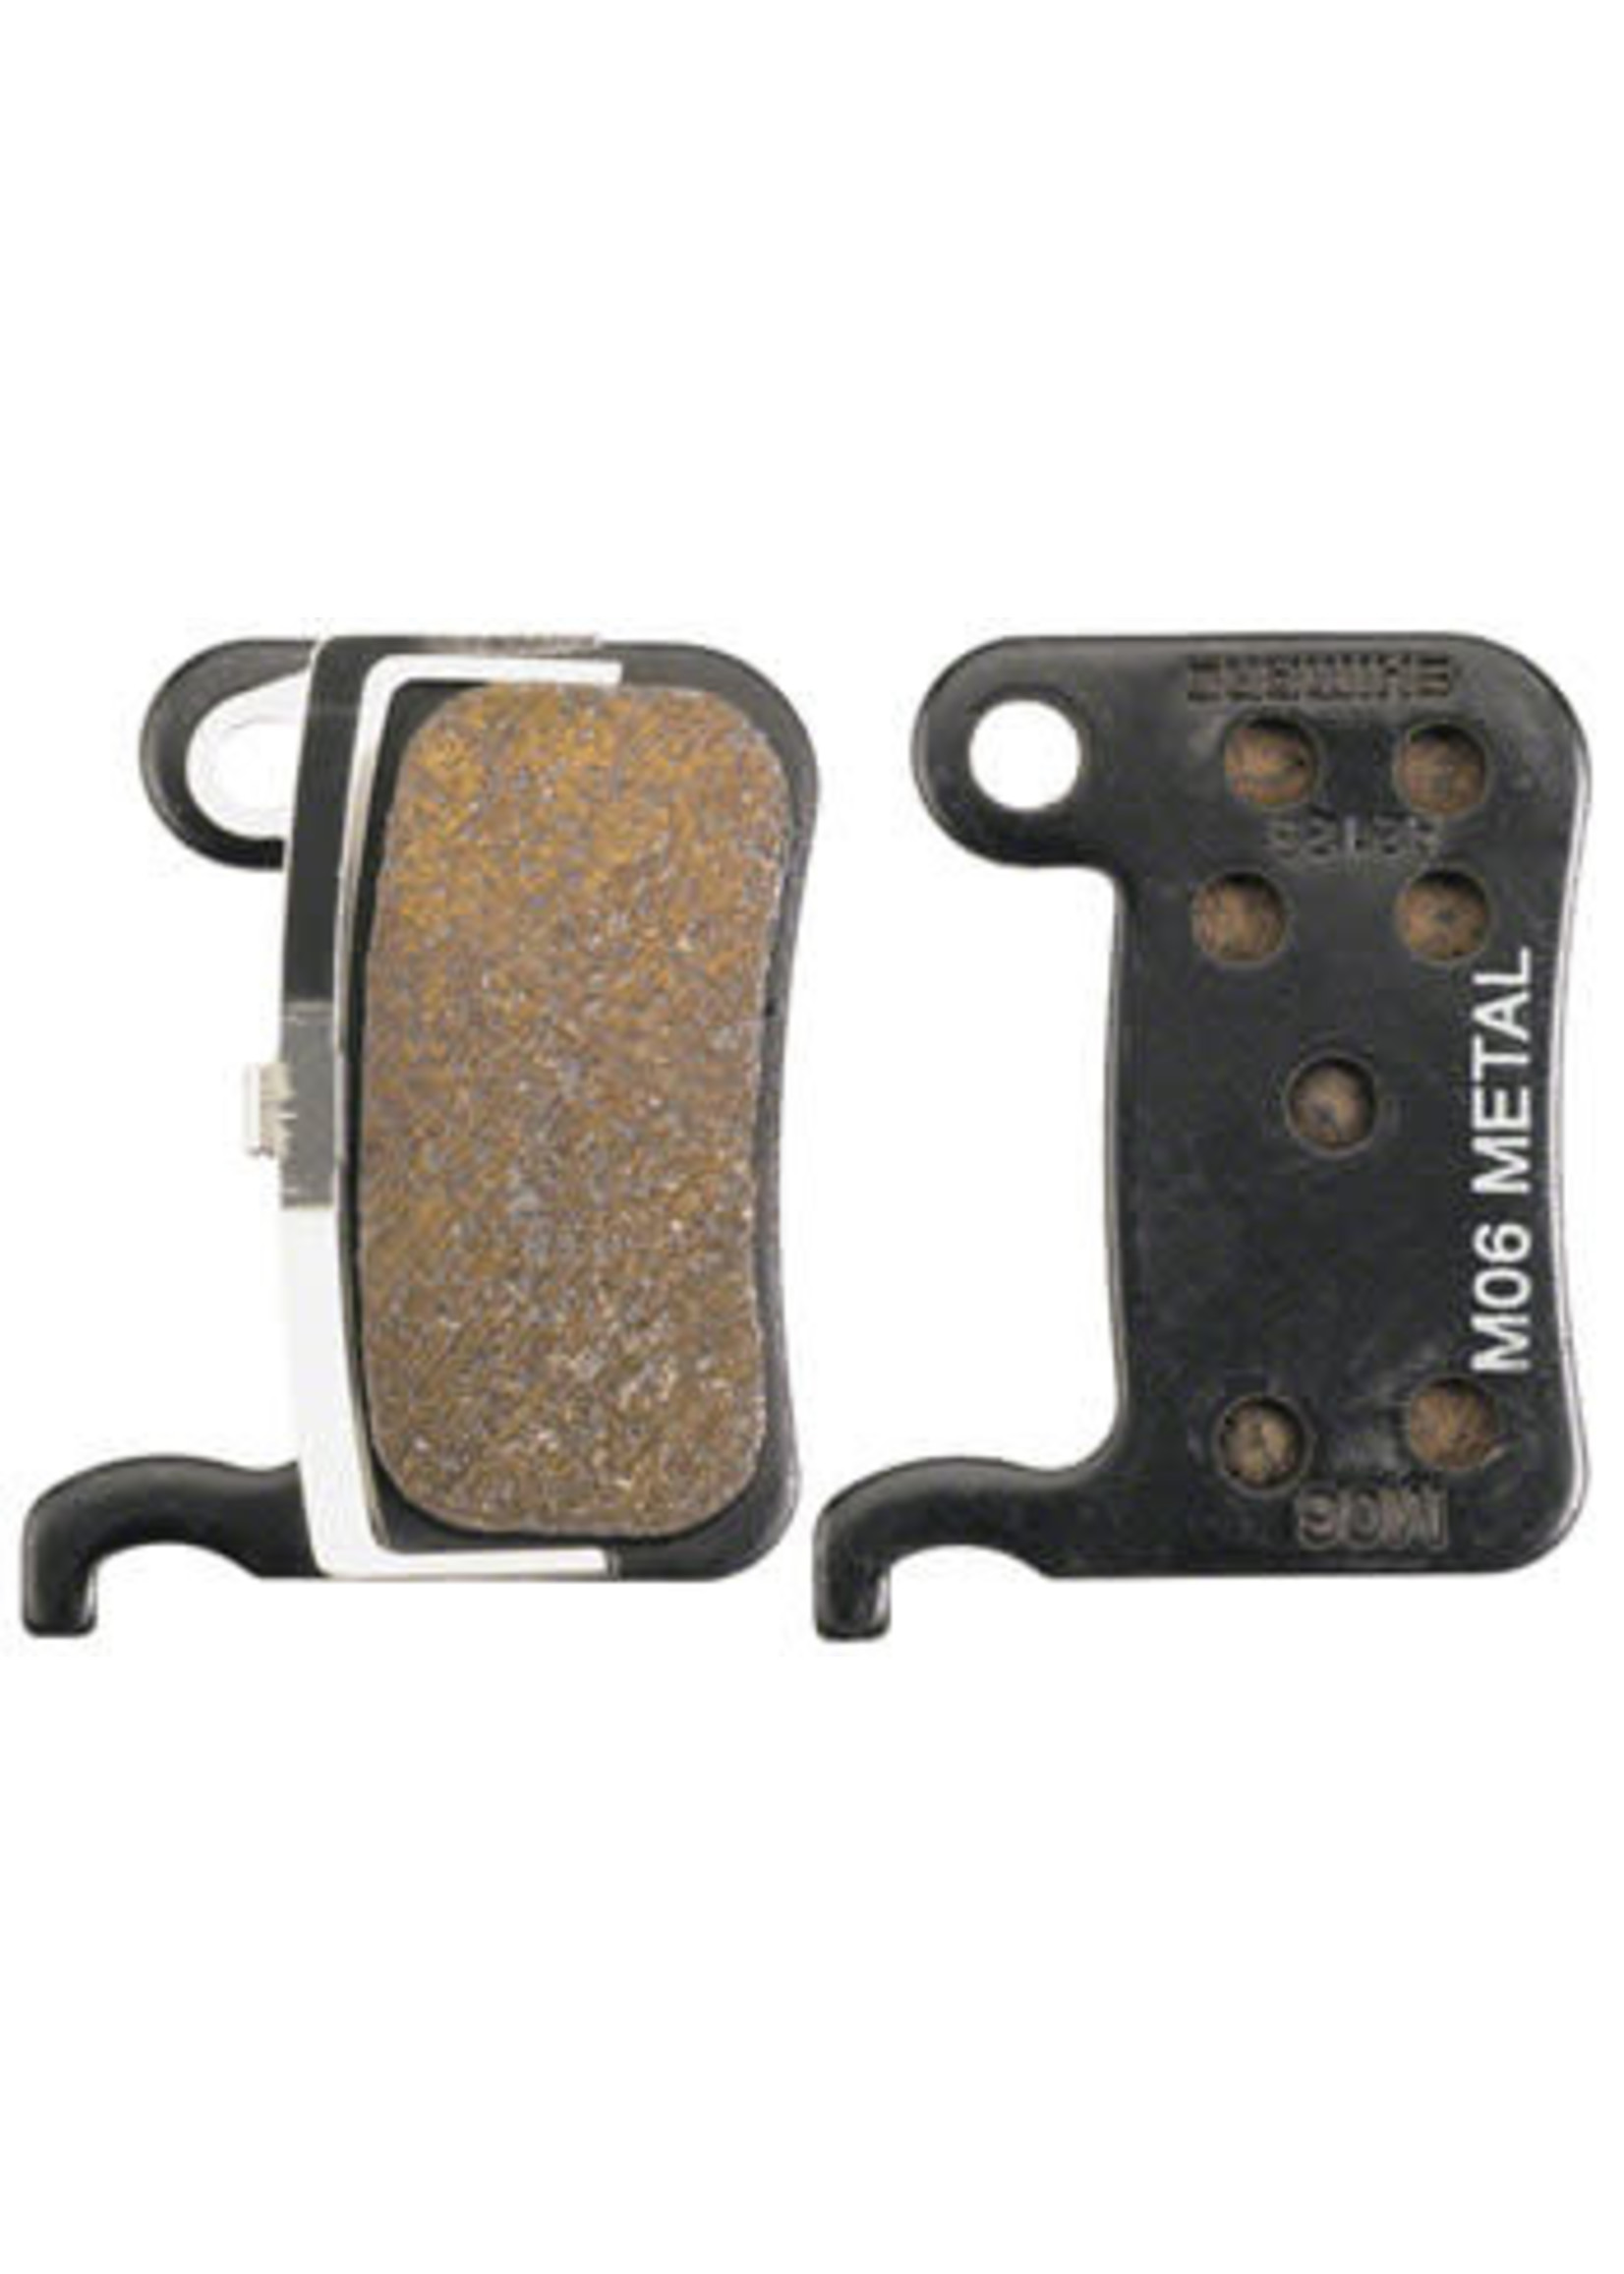 Shimano Shimano M06-MX Disc Brake Pads and Springs - Metal Compound, Steel Back Plate